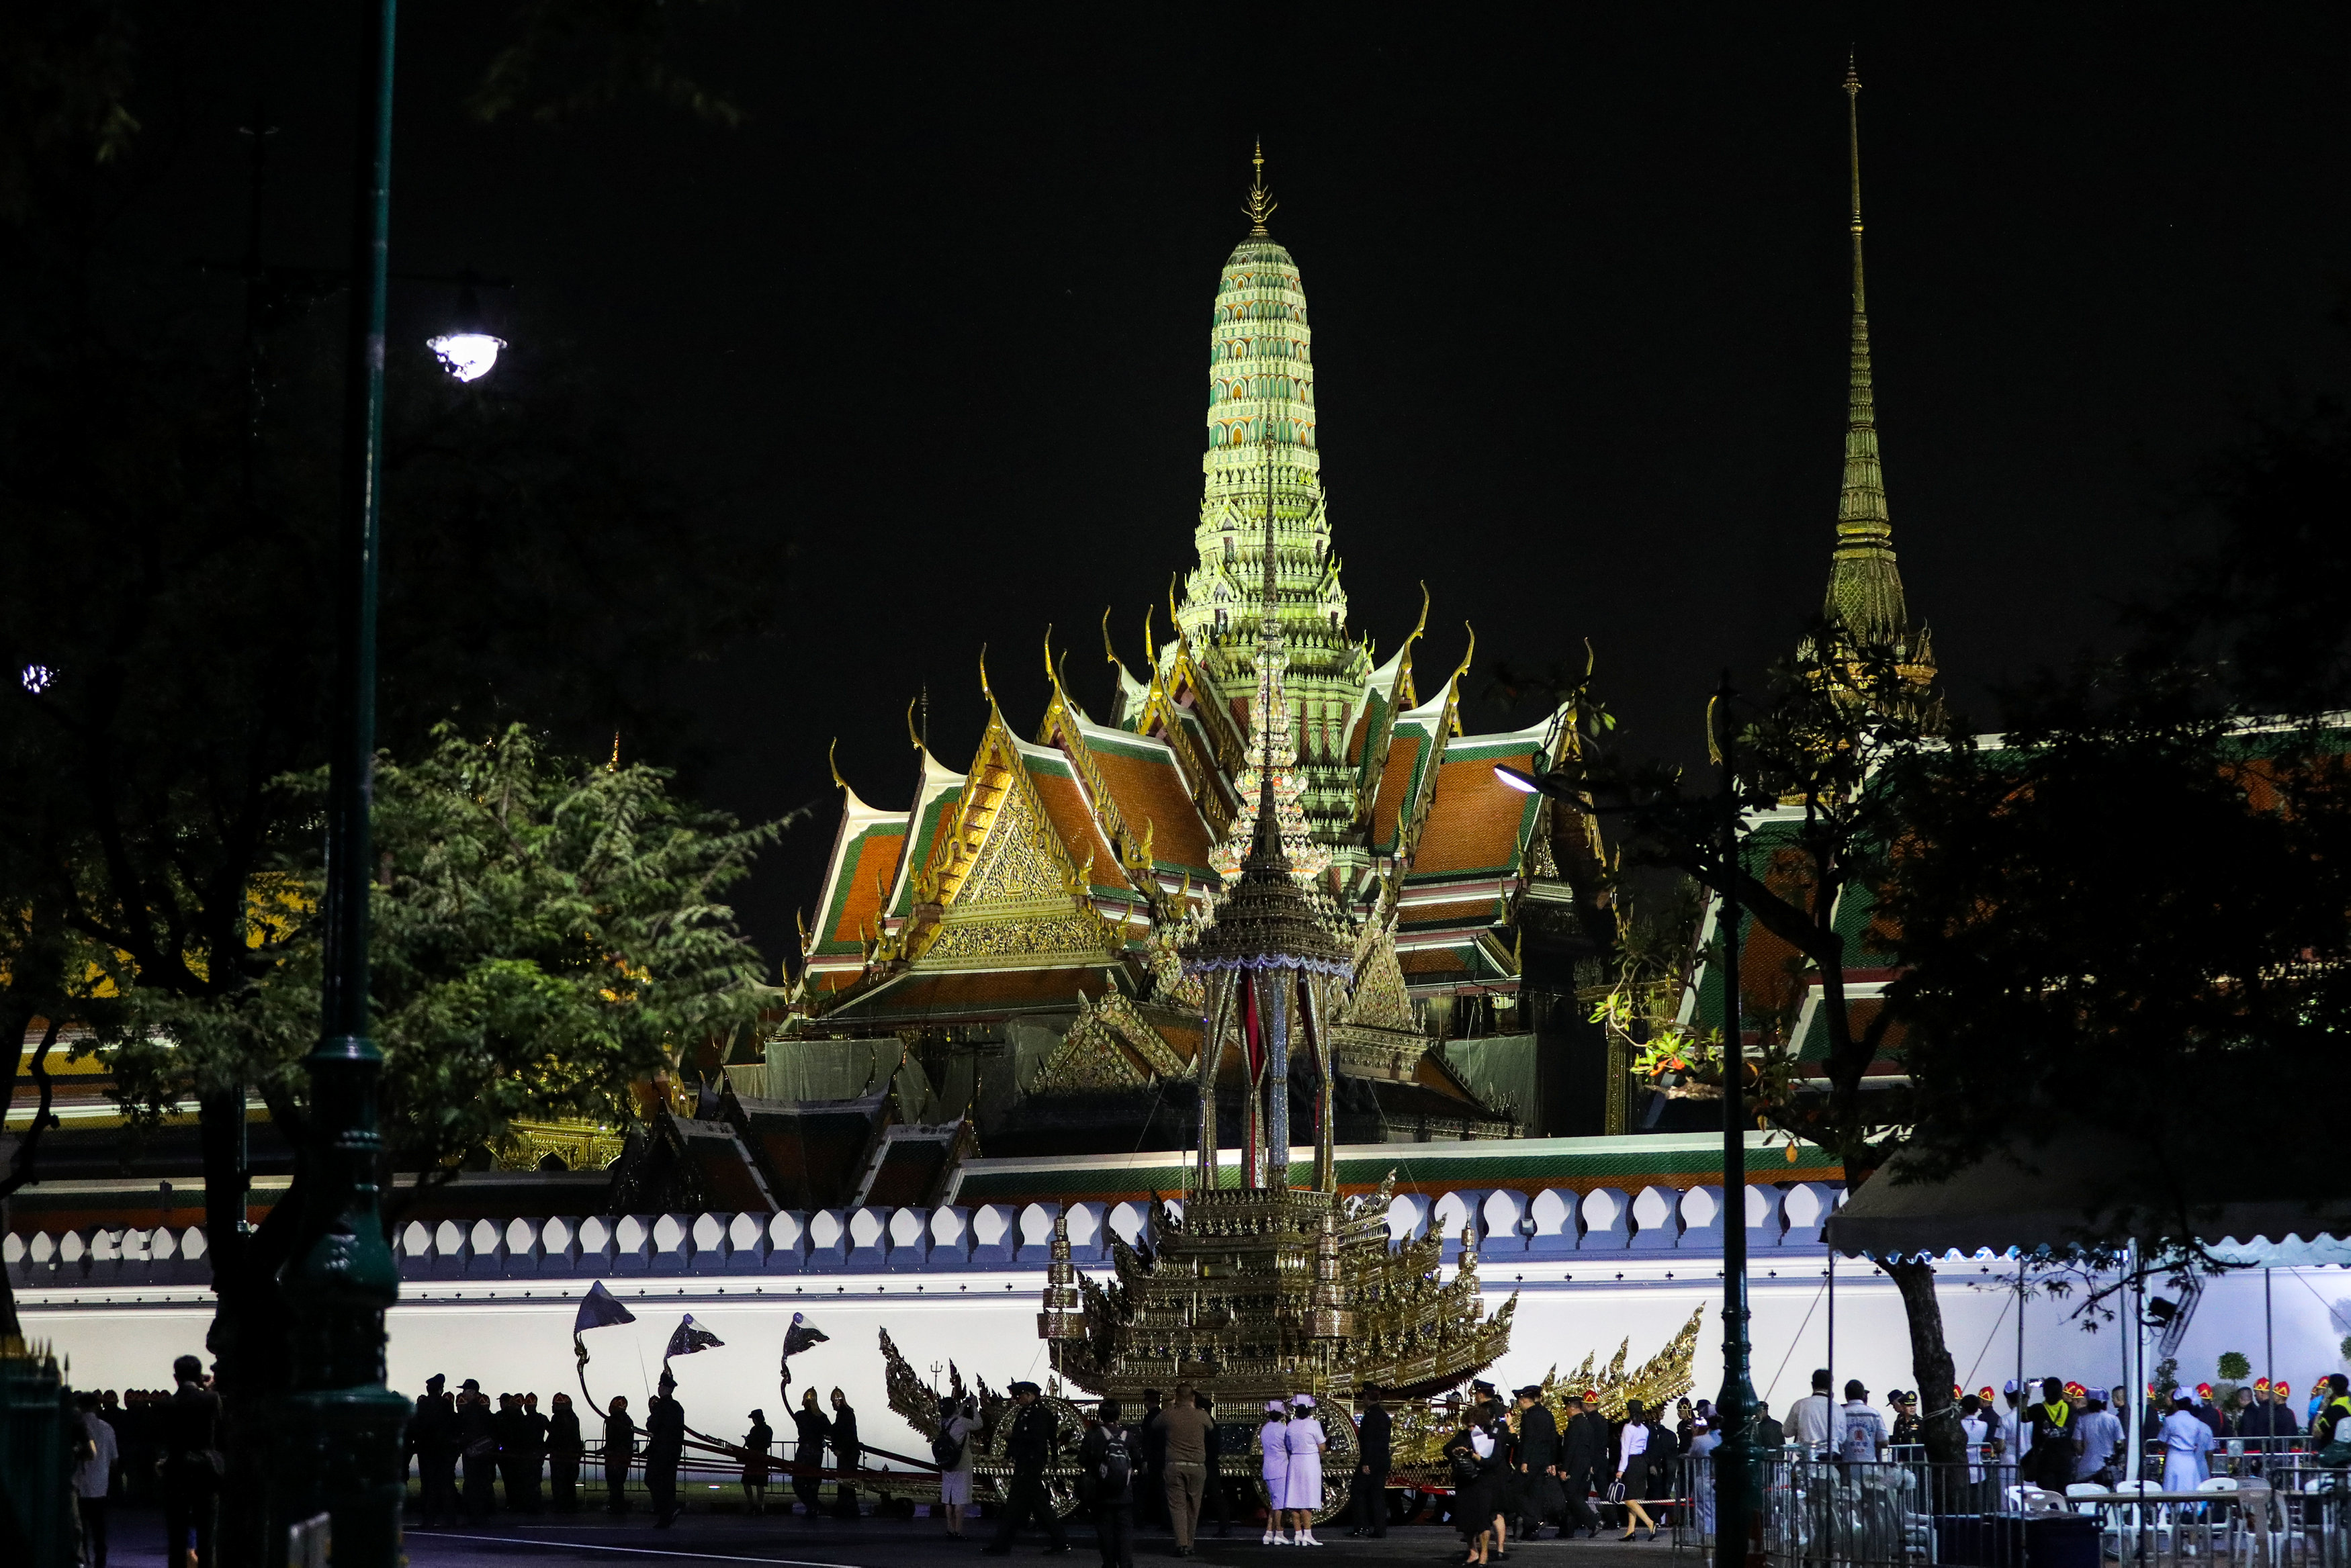 Hotels booked up in Thailand ahead of funeral of revered king